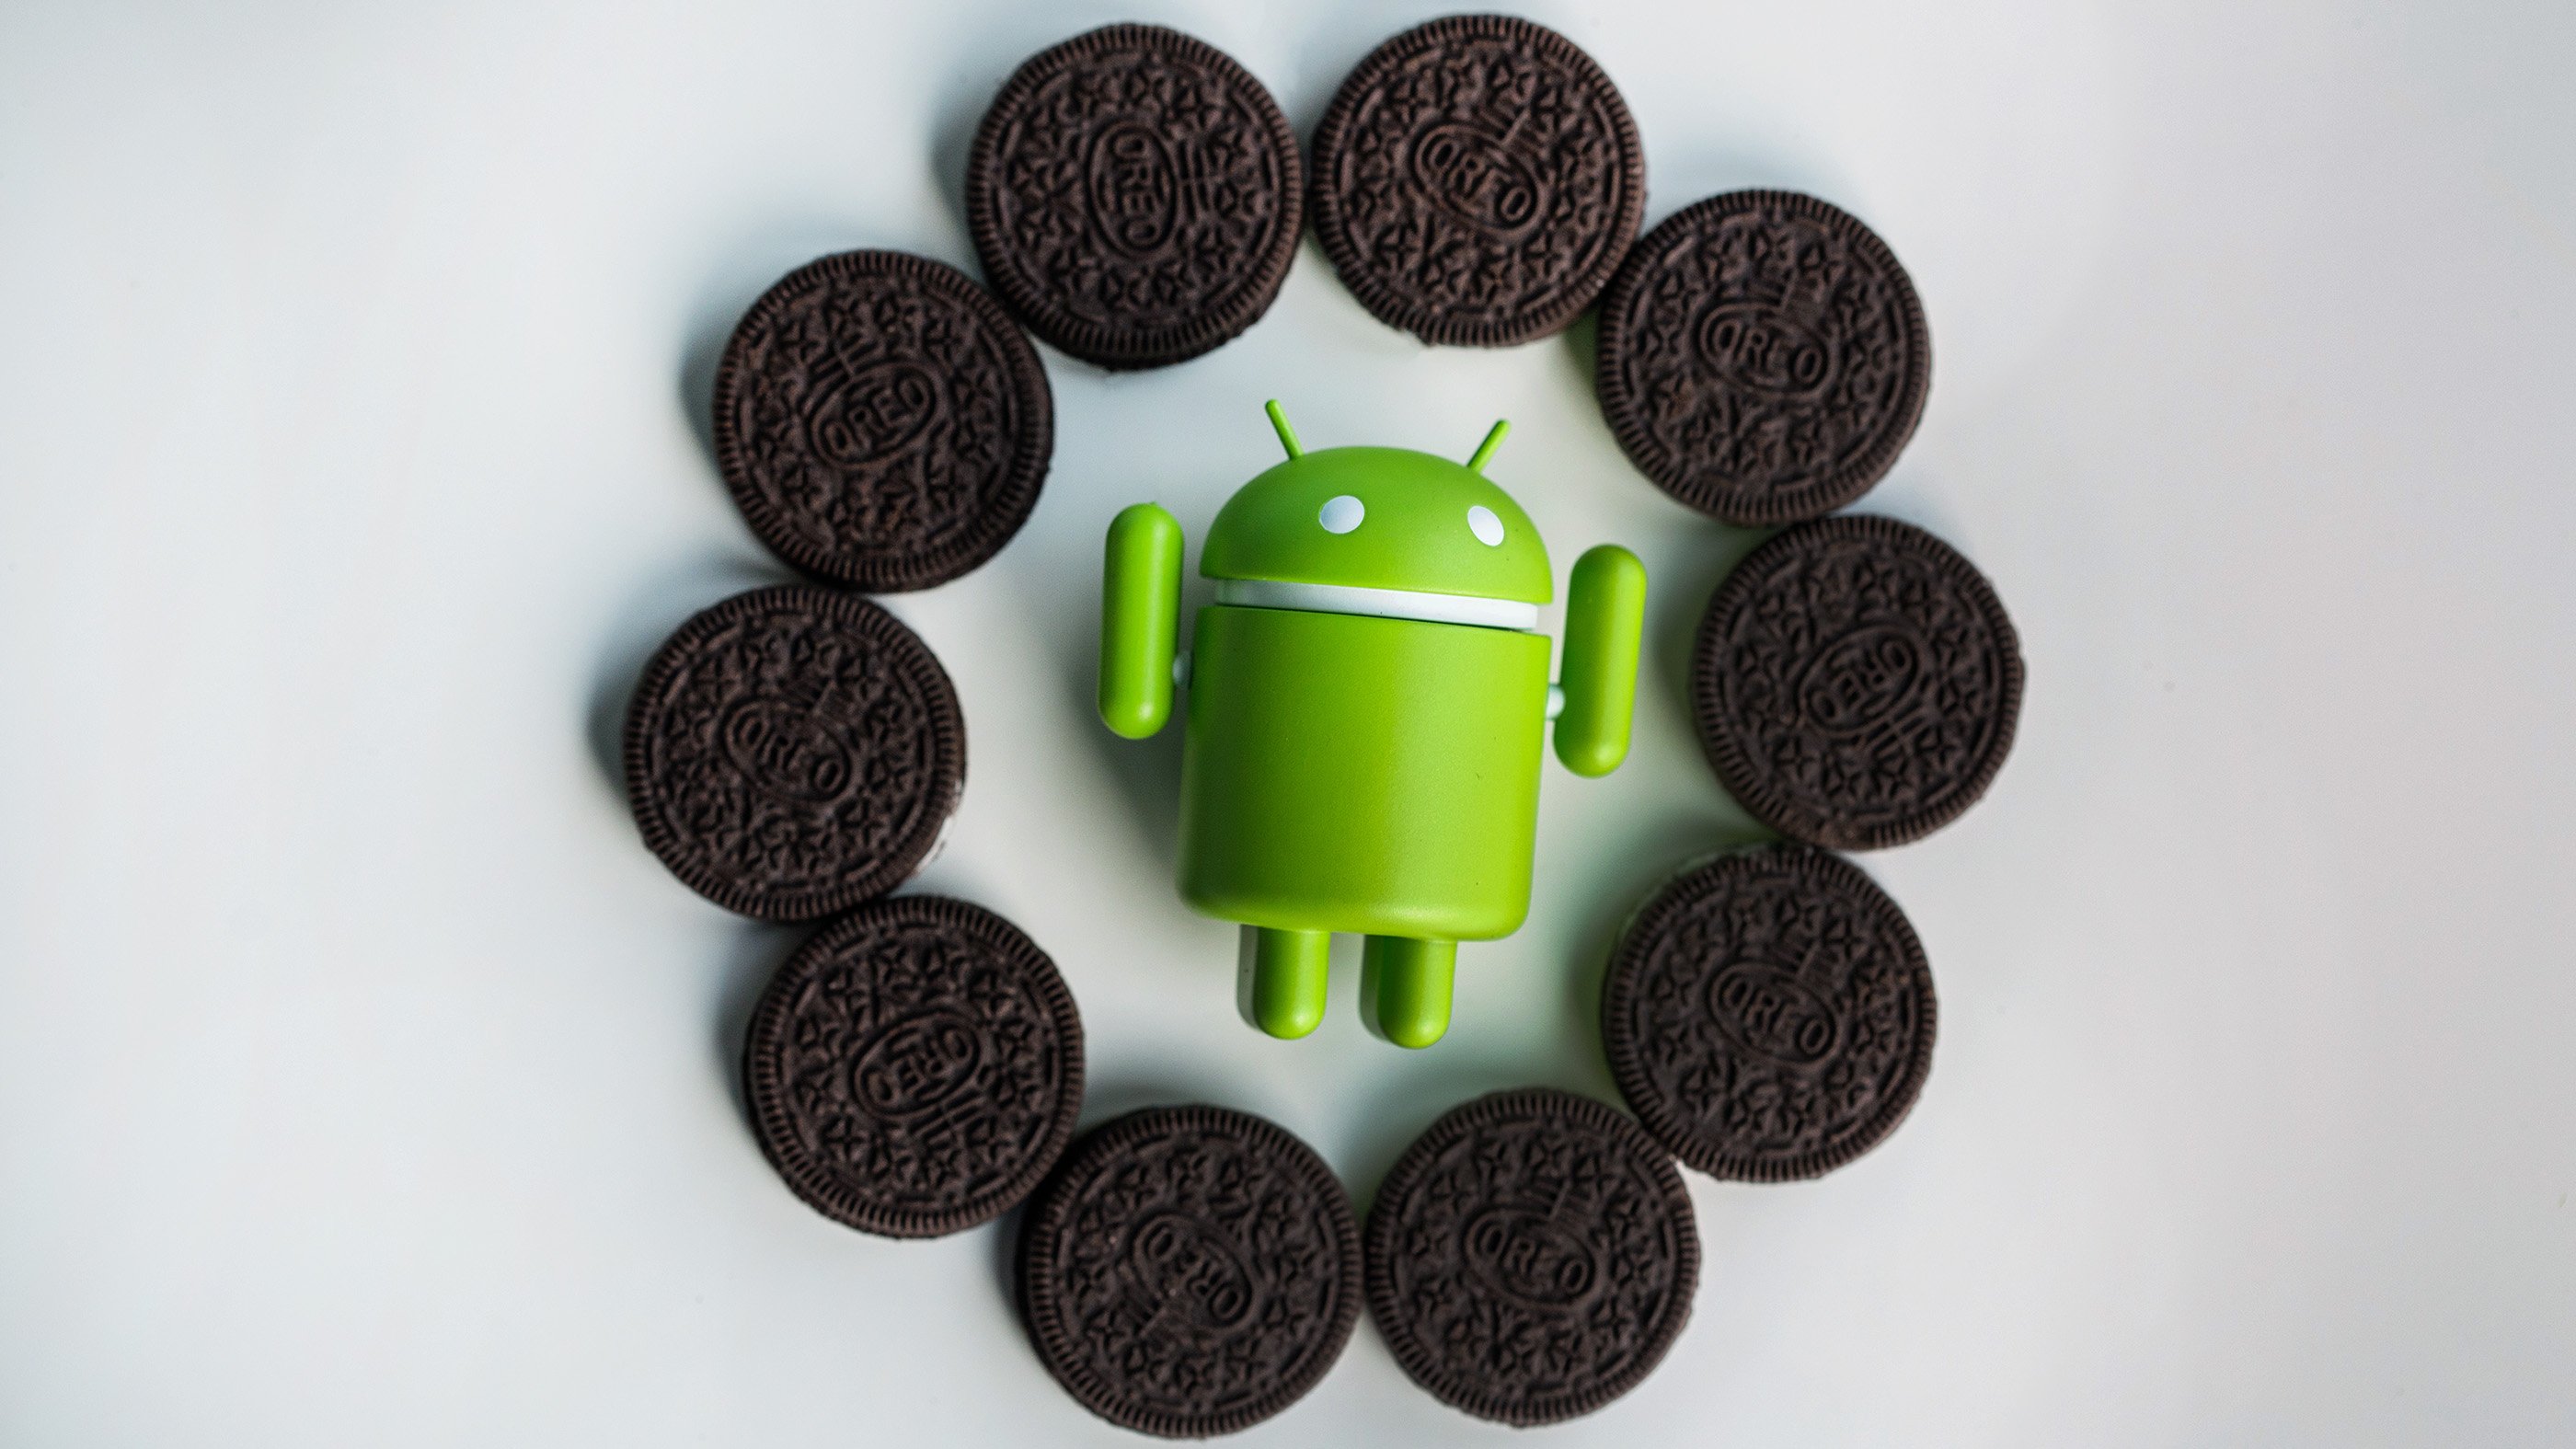 Android Oreo will be coming to HTC C10, HTC U11 and U Ultra